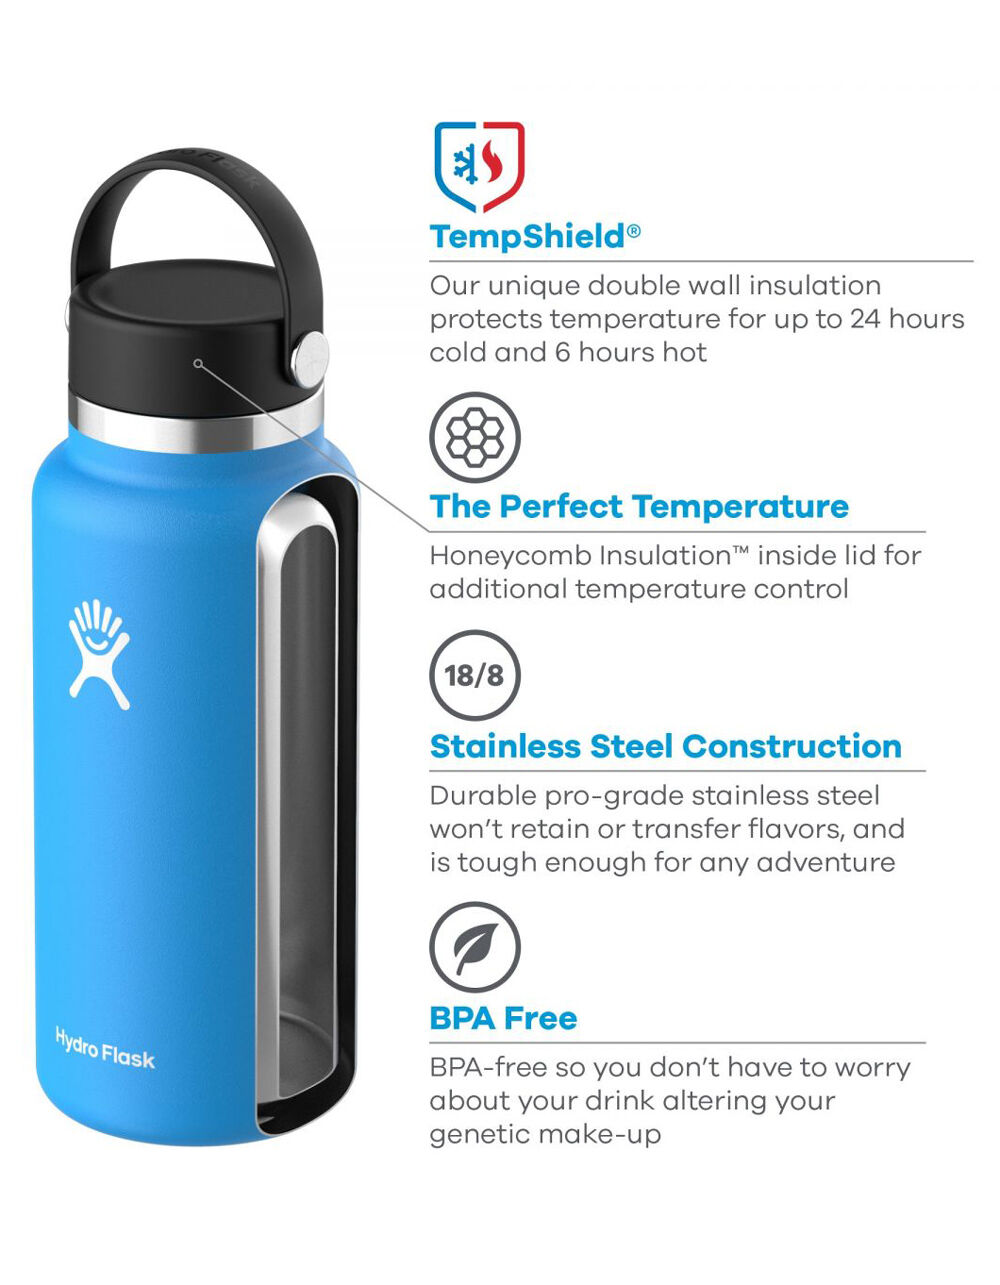 HYDRO FLASK 32 oz Wide Mouth Water Bottle - Special Edition - MOSS, Tillys, Salesforce Commerce Cloud